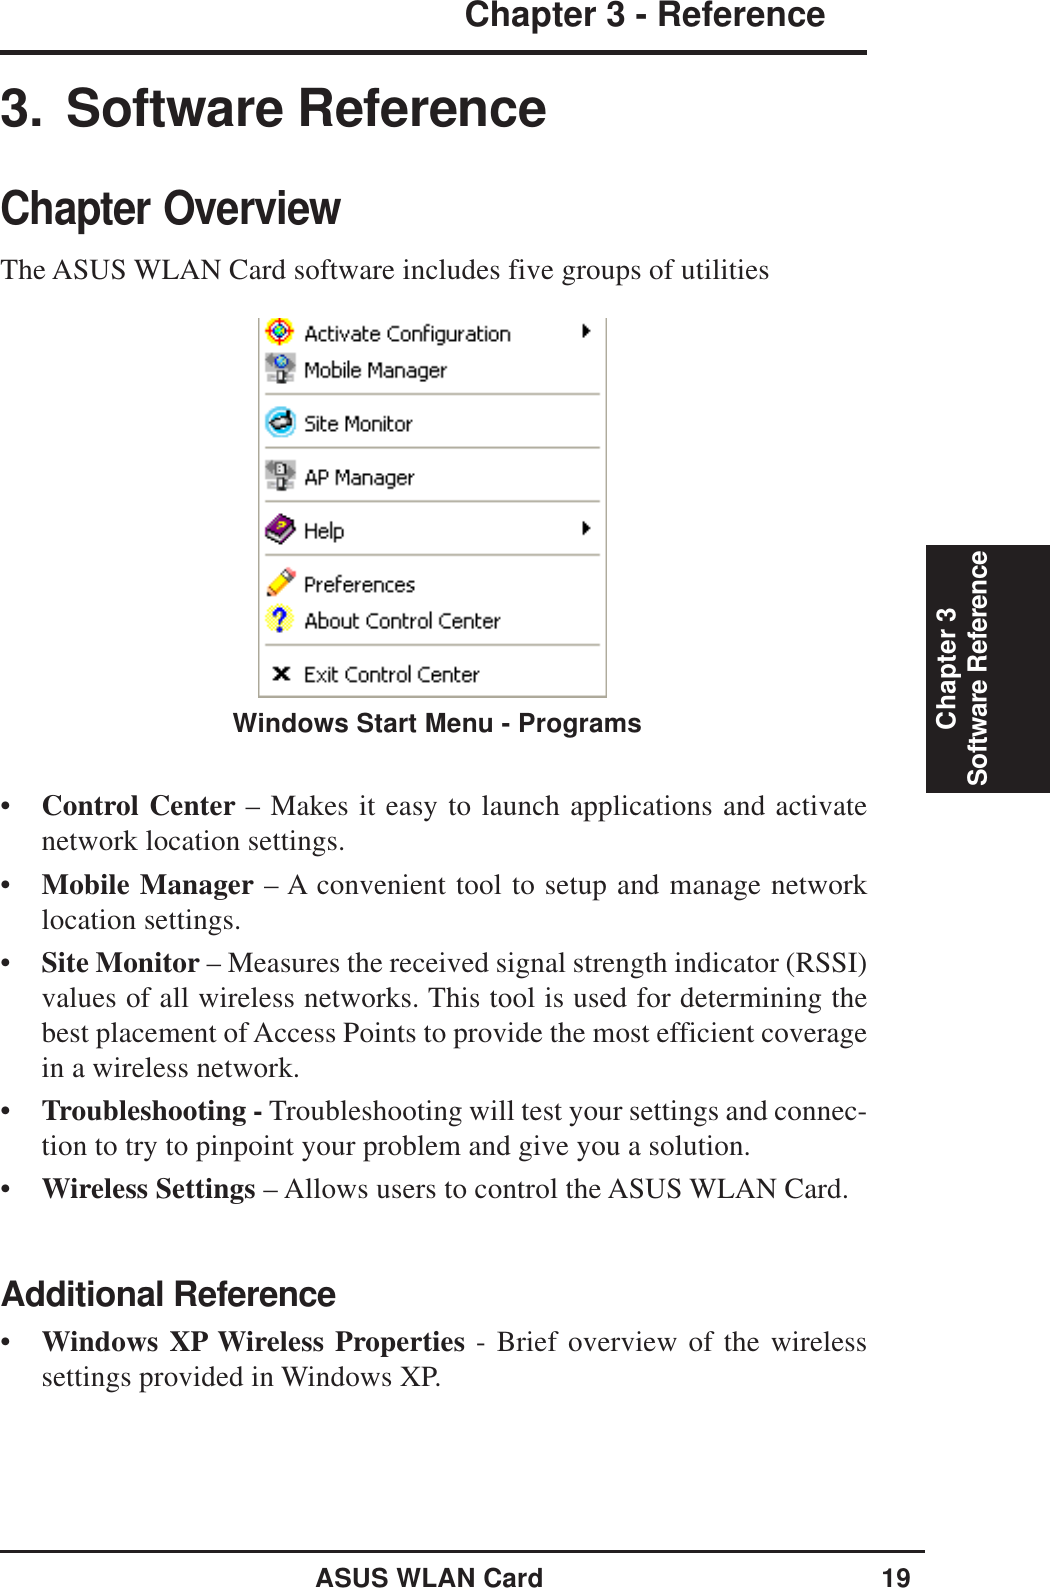 ASUS WLAN Card 19Chapter 3 - ReferenceChapter 3Software Reference•Control Center – Makes it easy to launch applications and activatenetwork location settings.•Mobile Manager – A convenient tool to setup and manage networklocation settings.•Site Monitor – Measures the received signal strength indicator (RSSI)values of all wireless networks. This tool is used for determining thebest placement of Access Points to provide the most efficient coveragein a wireless network.•Troubleshooting - Troubleshooting will test your settings and connec-tion to try to pinpoint your problem and give you a solution.•Wireless Settings – Allows users to control the ASUS WLAN Card.Additional Reference•Windows XP Wireless Properties - Brief overview of the wirelesssettings provided in Windows XP.3. Software ReferenceChapter OverviewThe ASUS WLAN Card software includes five groups of utilitiesWindows Start Menu - Programs